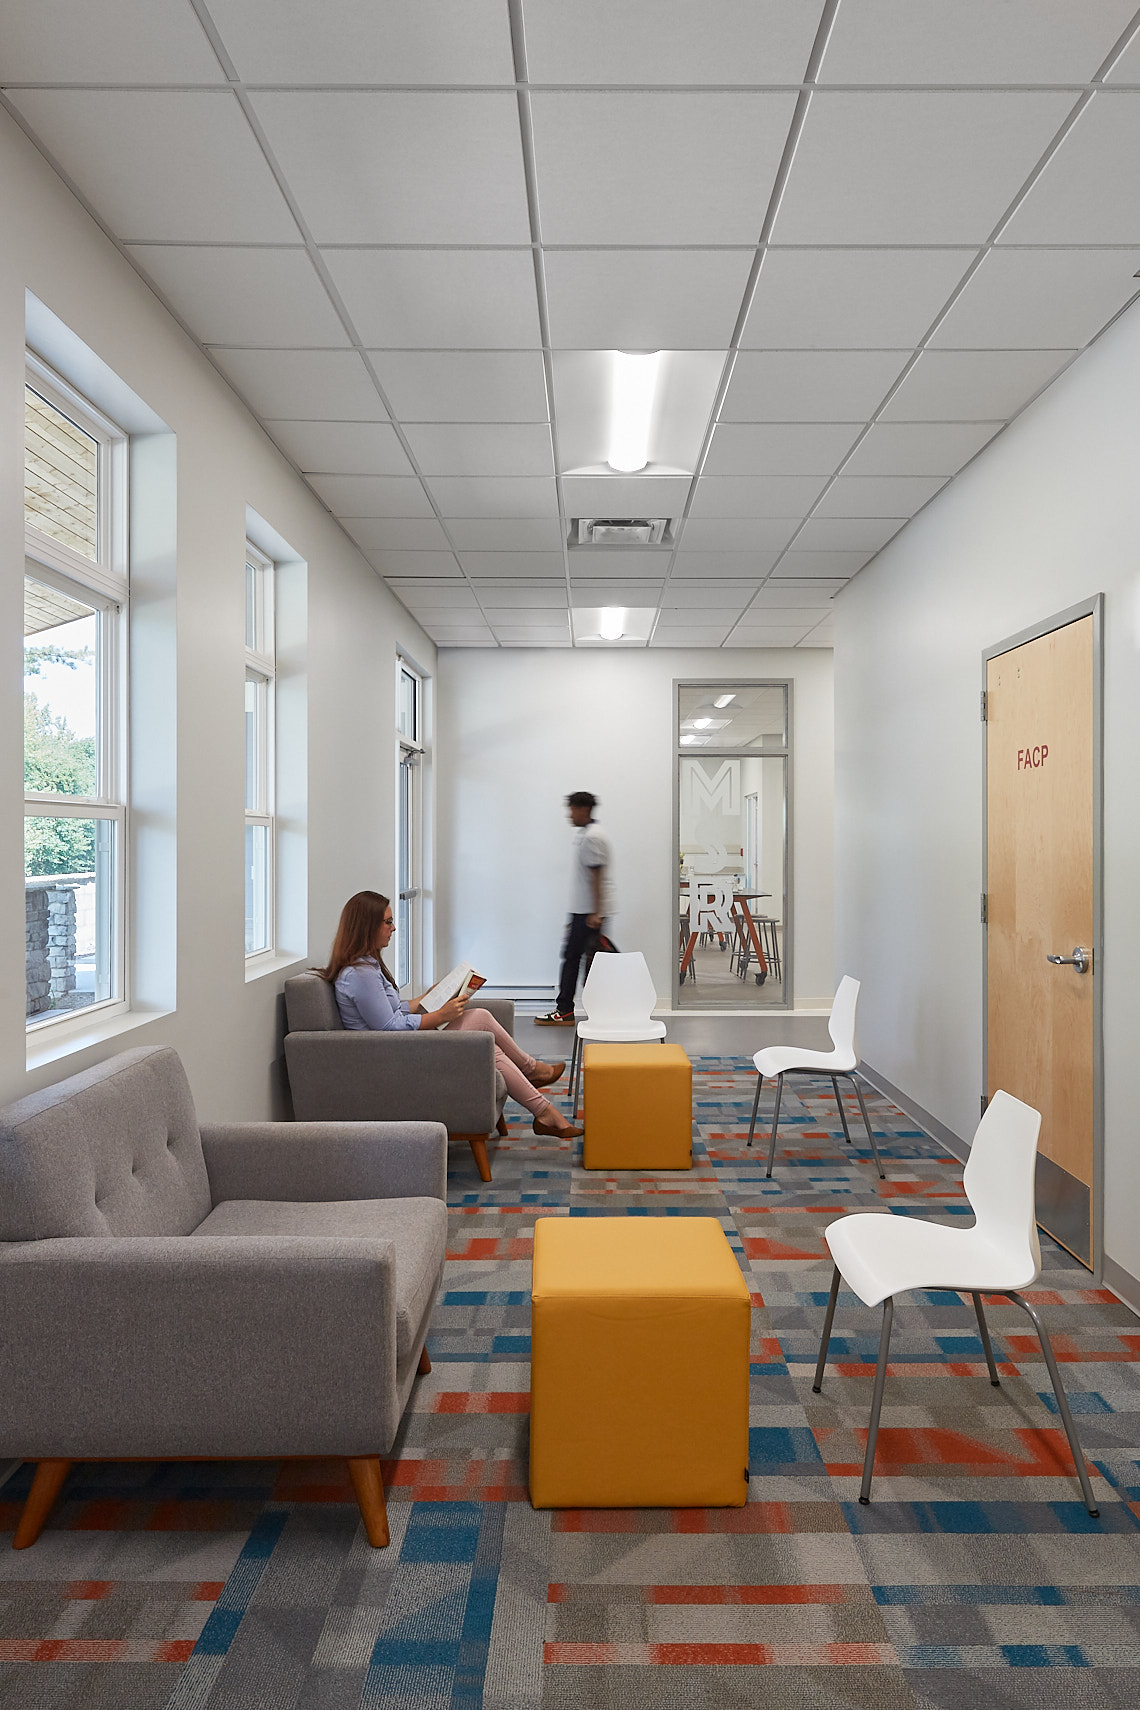 Montessori School Of Raleigh, Raleigh NC - HH Architecture, Raleigh NC